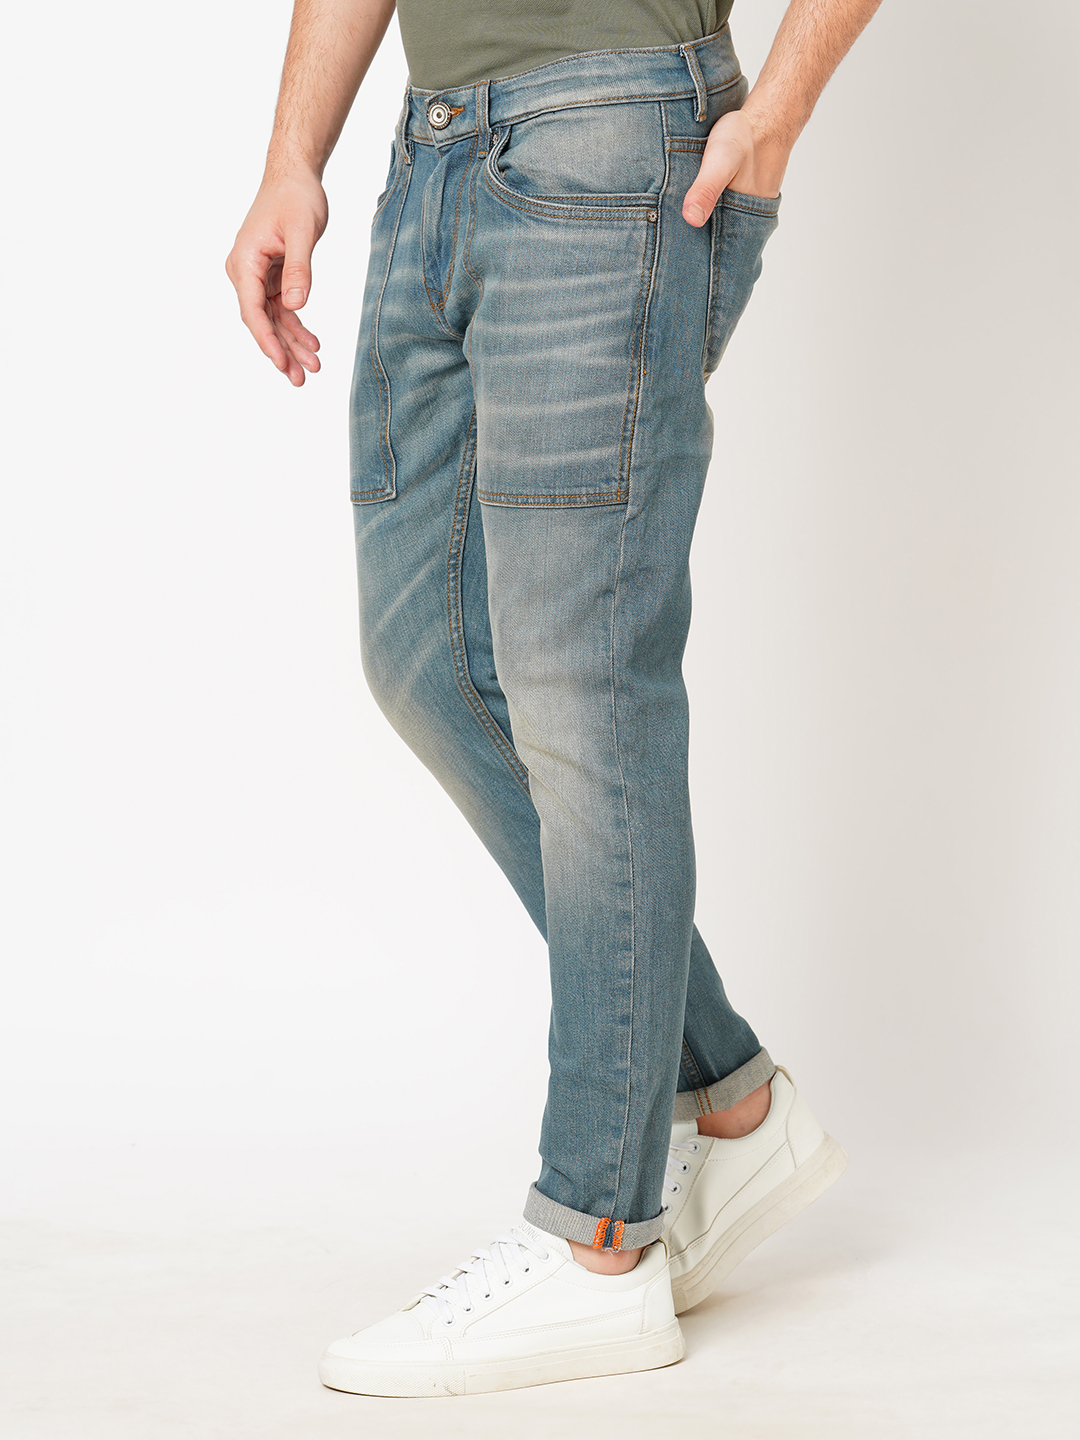 PETROL 5 POCKET LOW-RISE ANKLE LENGTH JEANS (SPRINGSTEEN FIT)